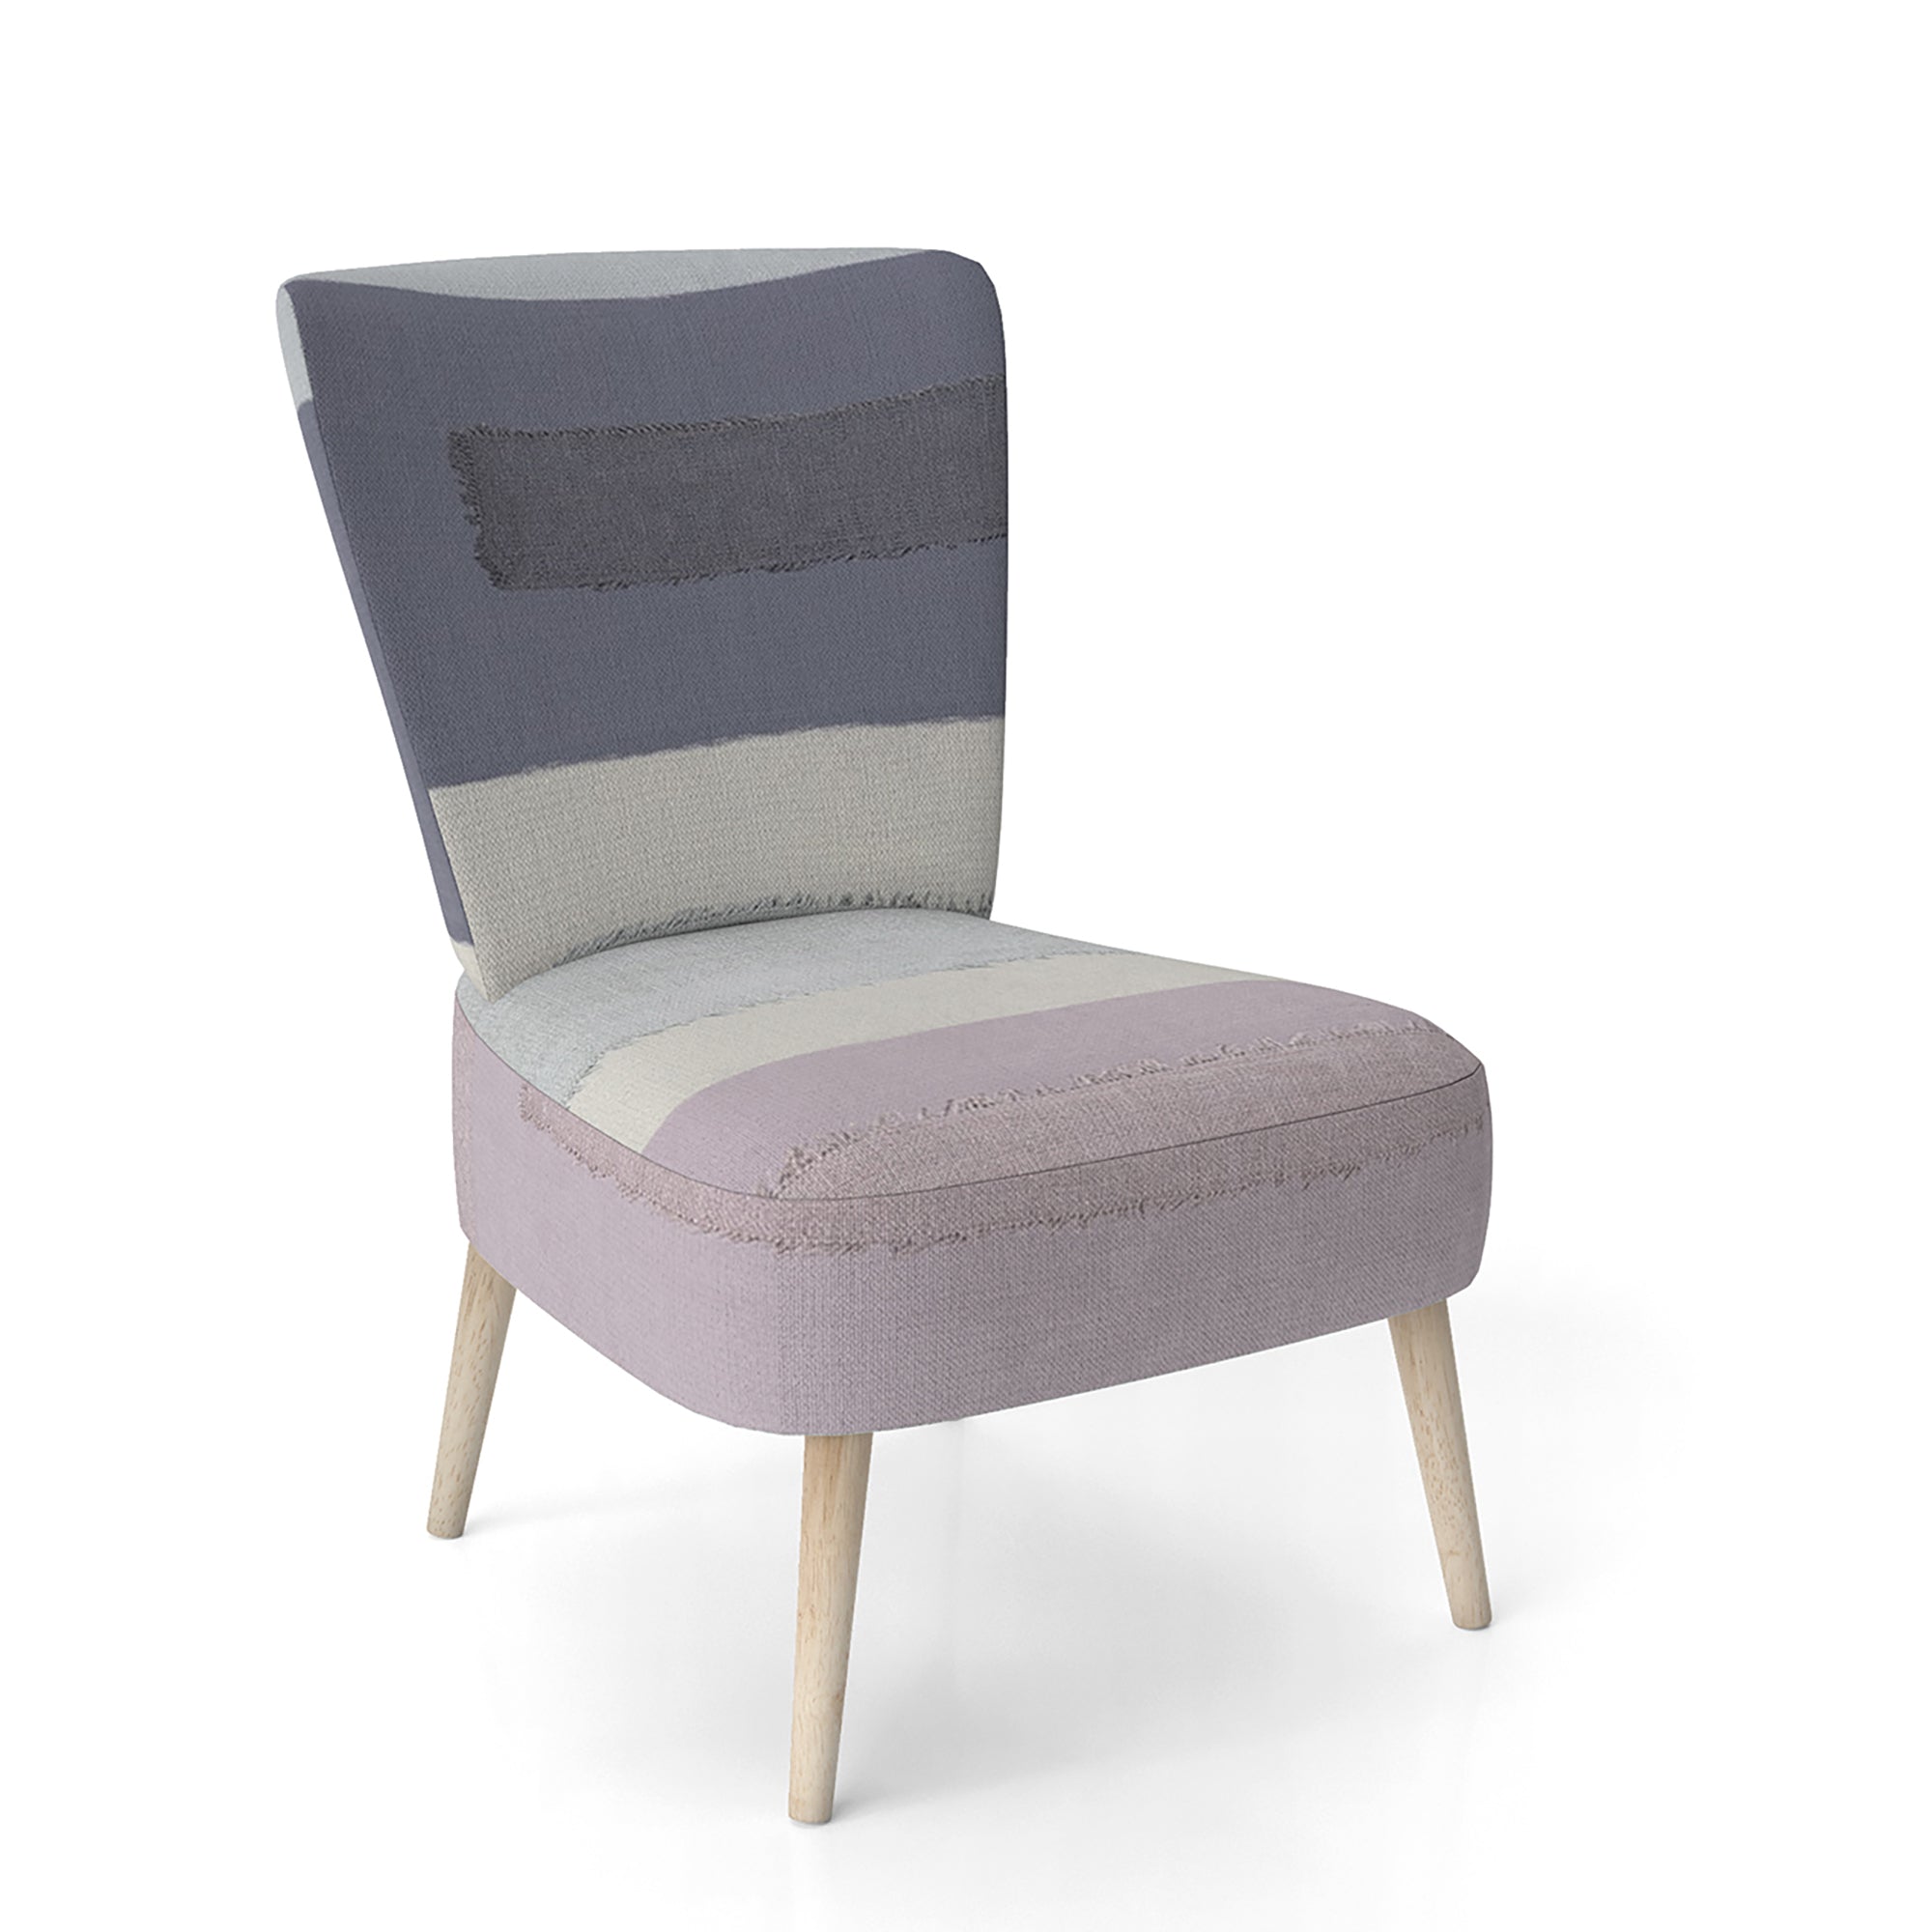 Painted Weaving IV FB Modern Accent Chair